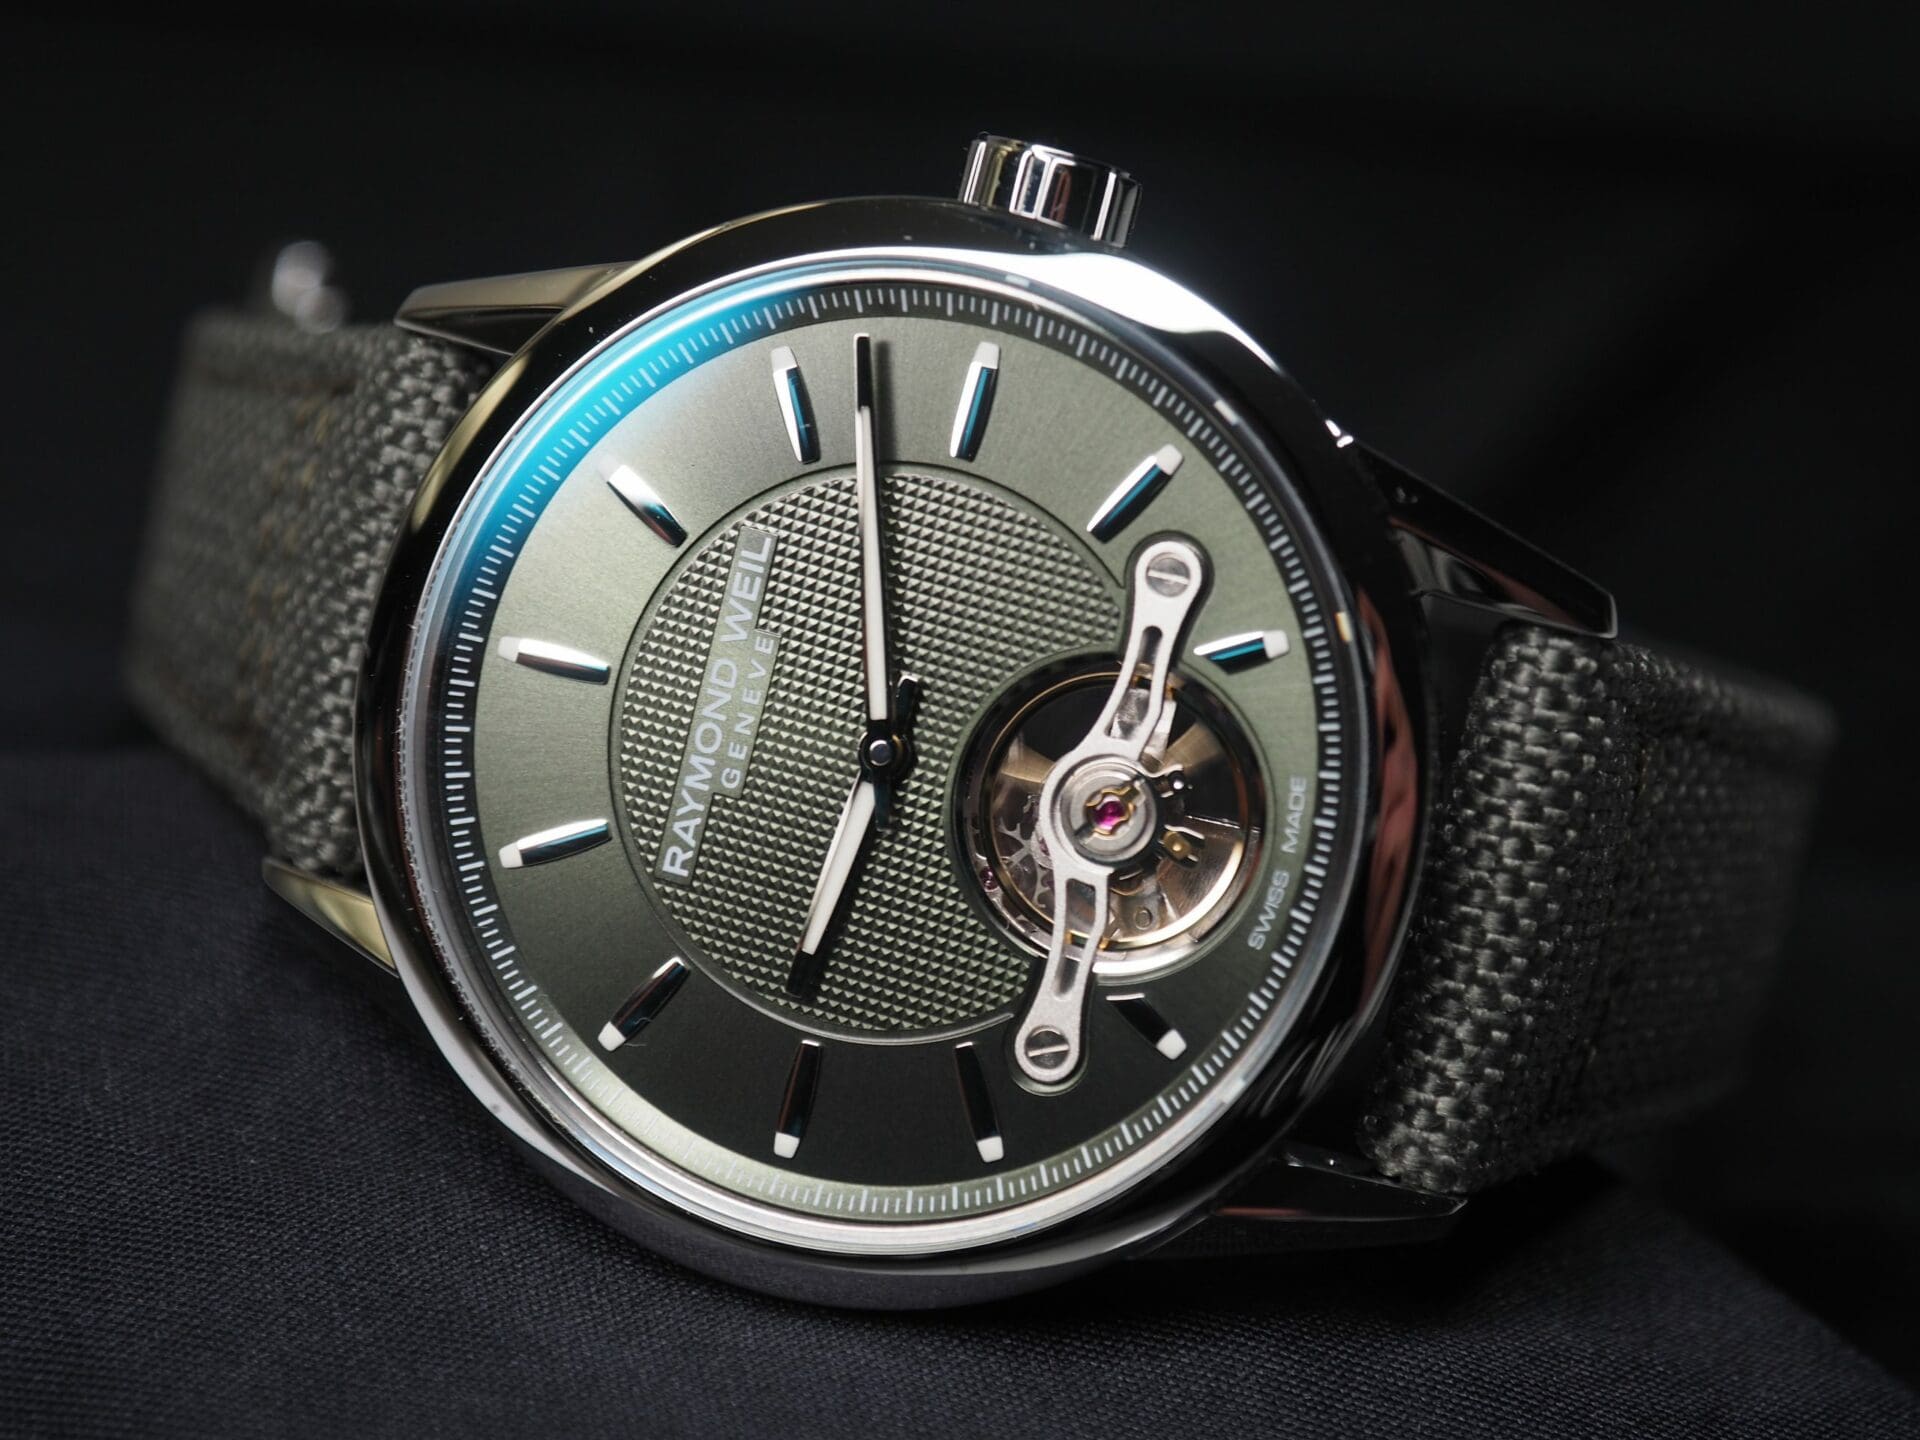 VIDEO: Oh, hello there Raymond Weil Freelancer Calibre RW1212 in Green, looking sharp in the metal